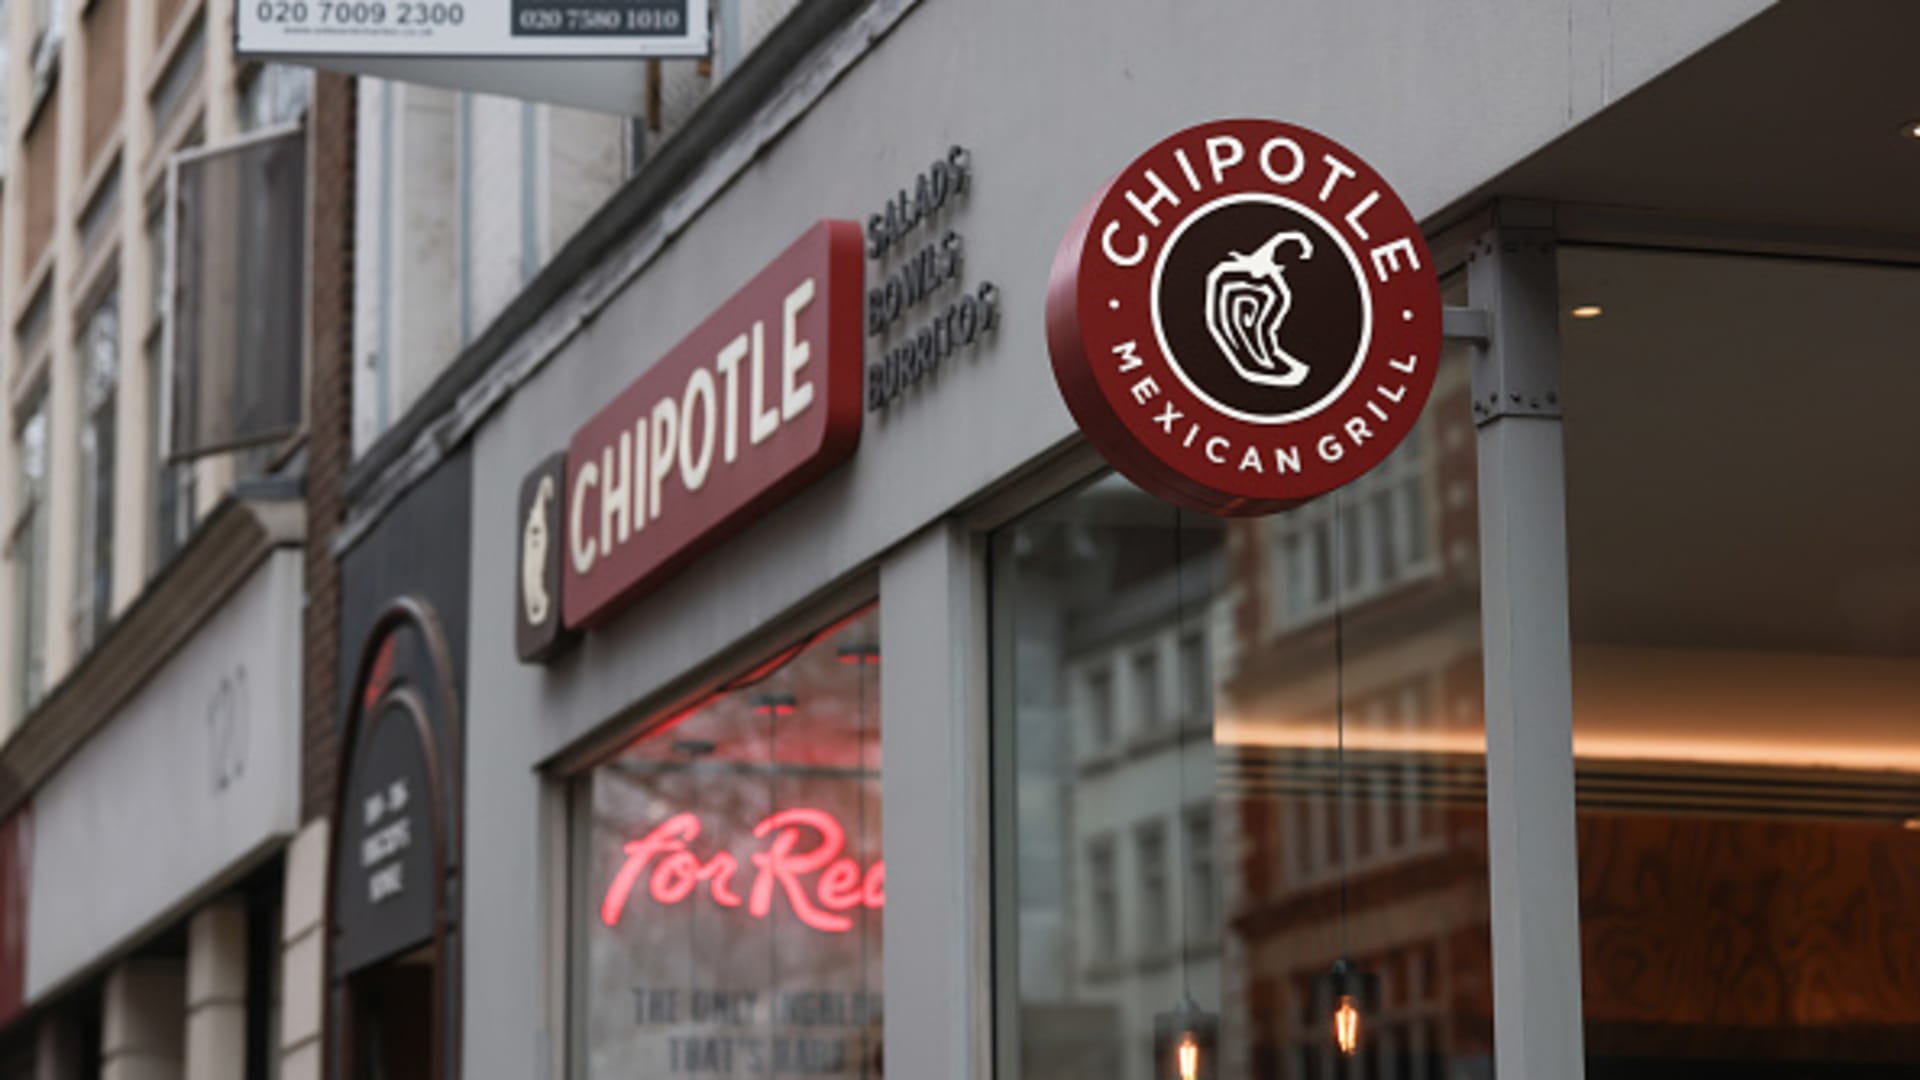 Stocks making the biggest moves midday: Intel, Chipotle, Juniper Networks and more